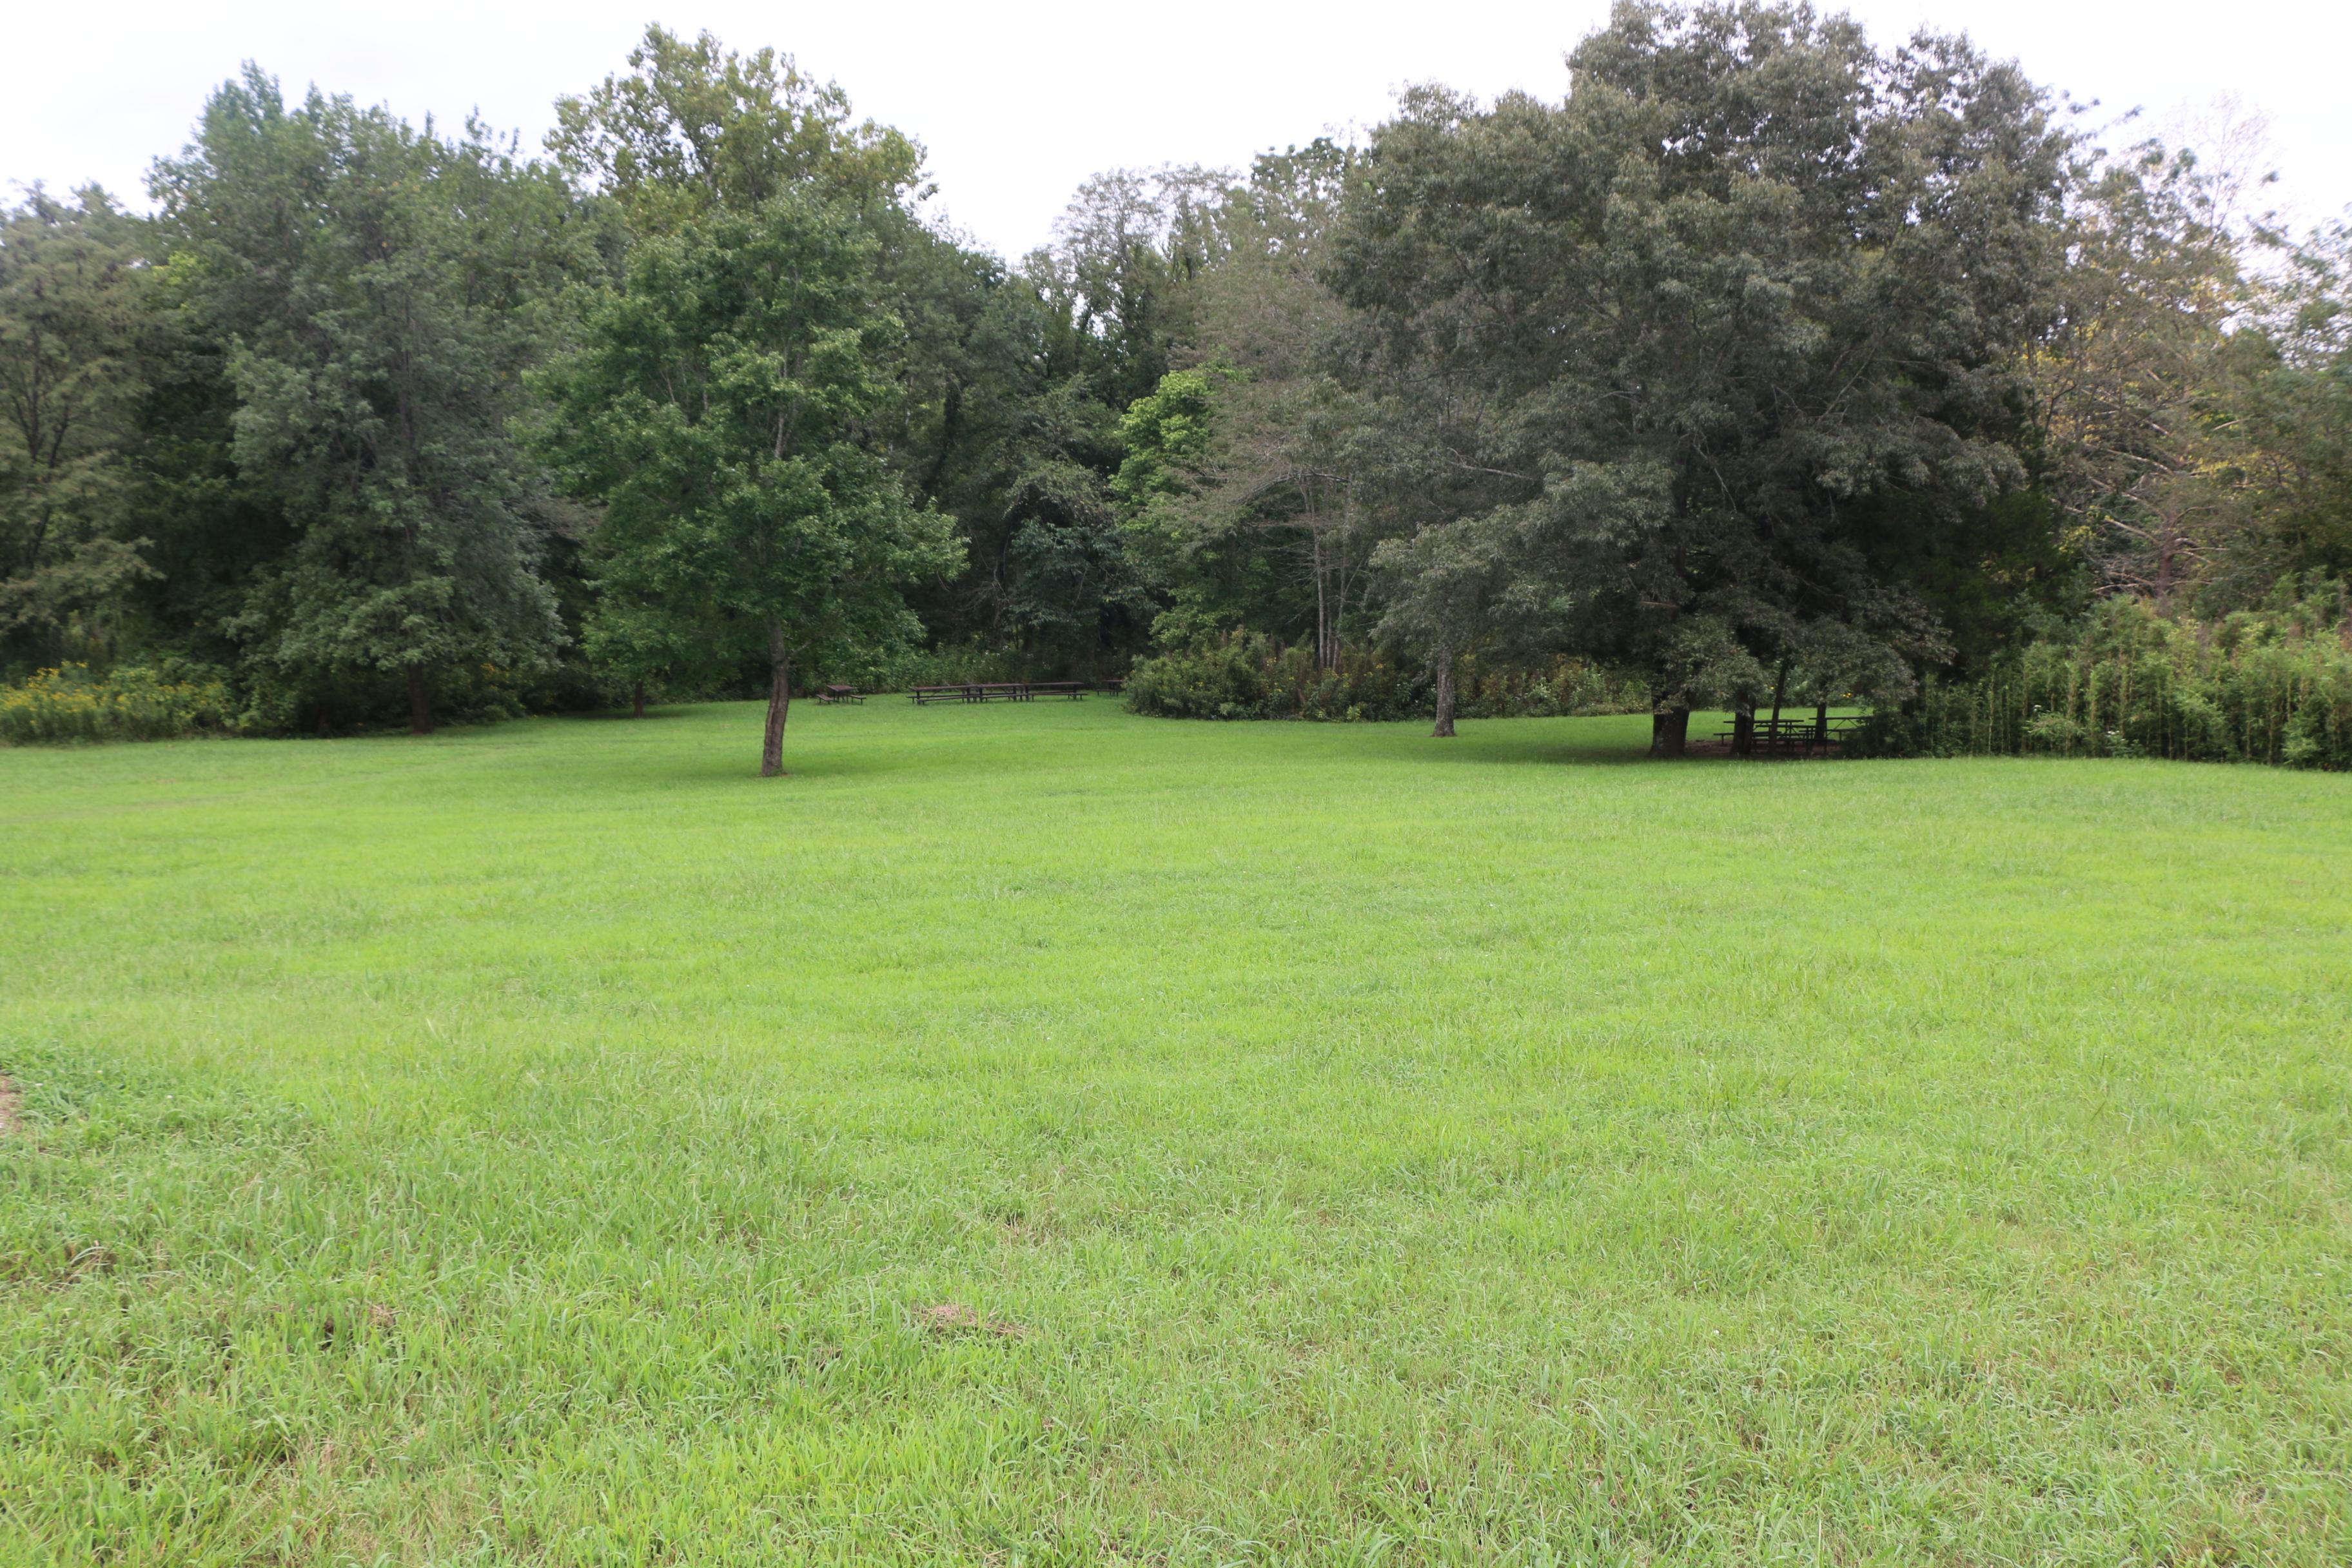 A large grassy field with two group sites for tent camping with picnic tables and shade trees.